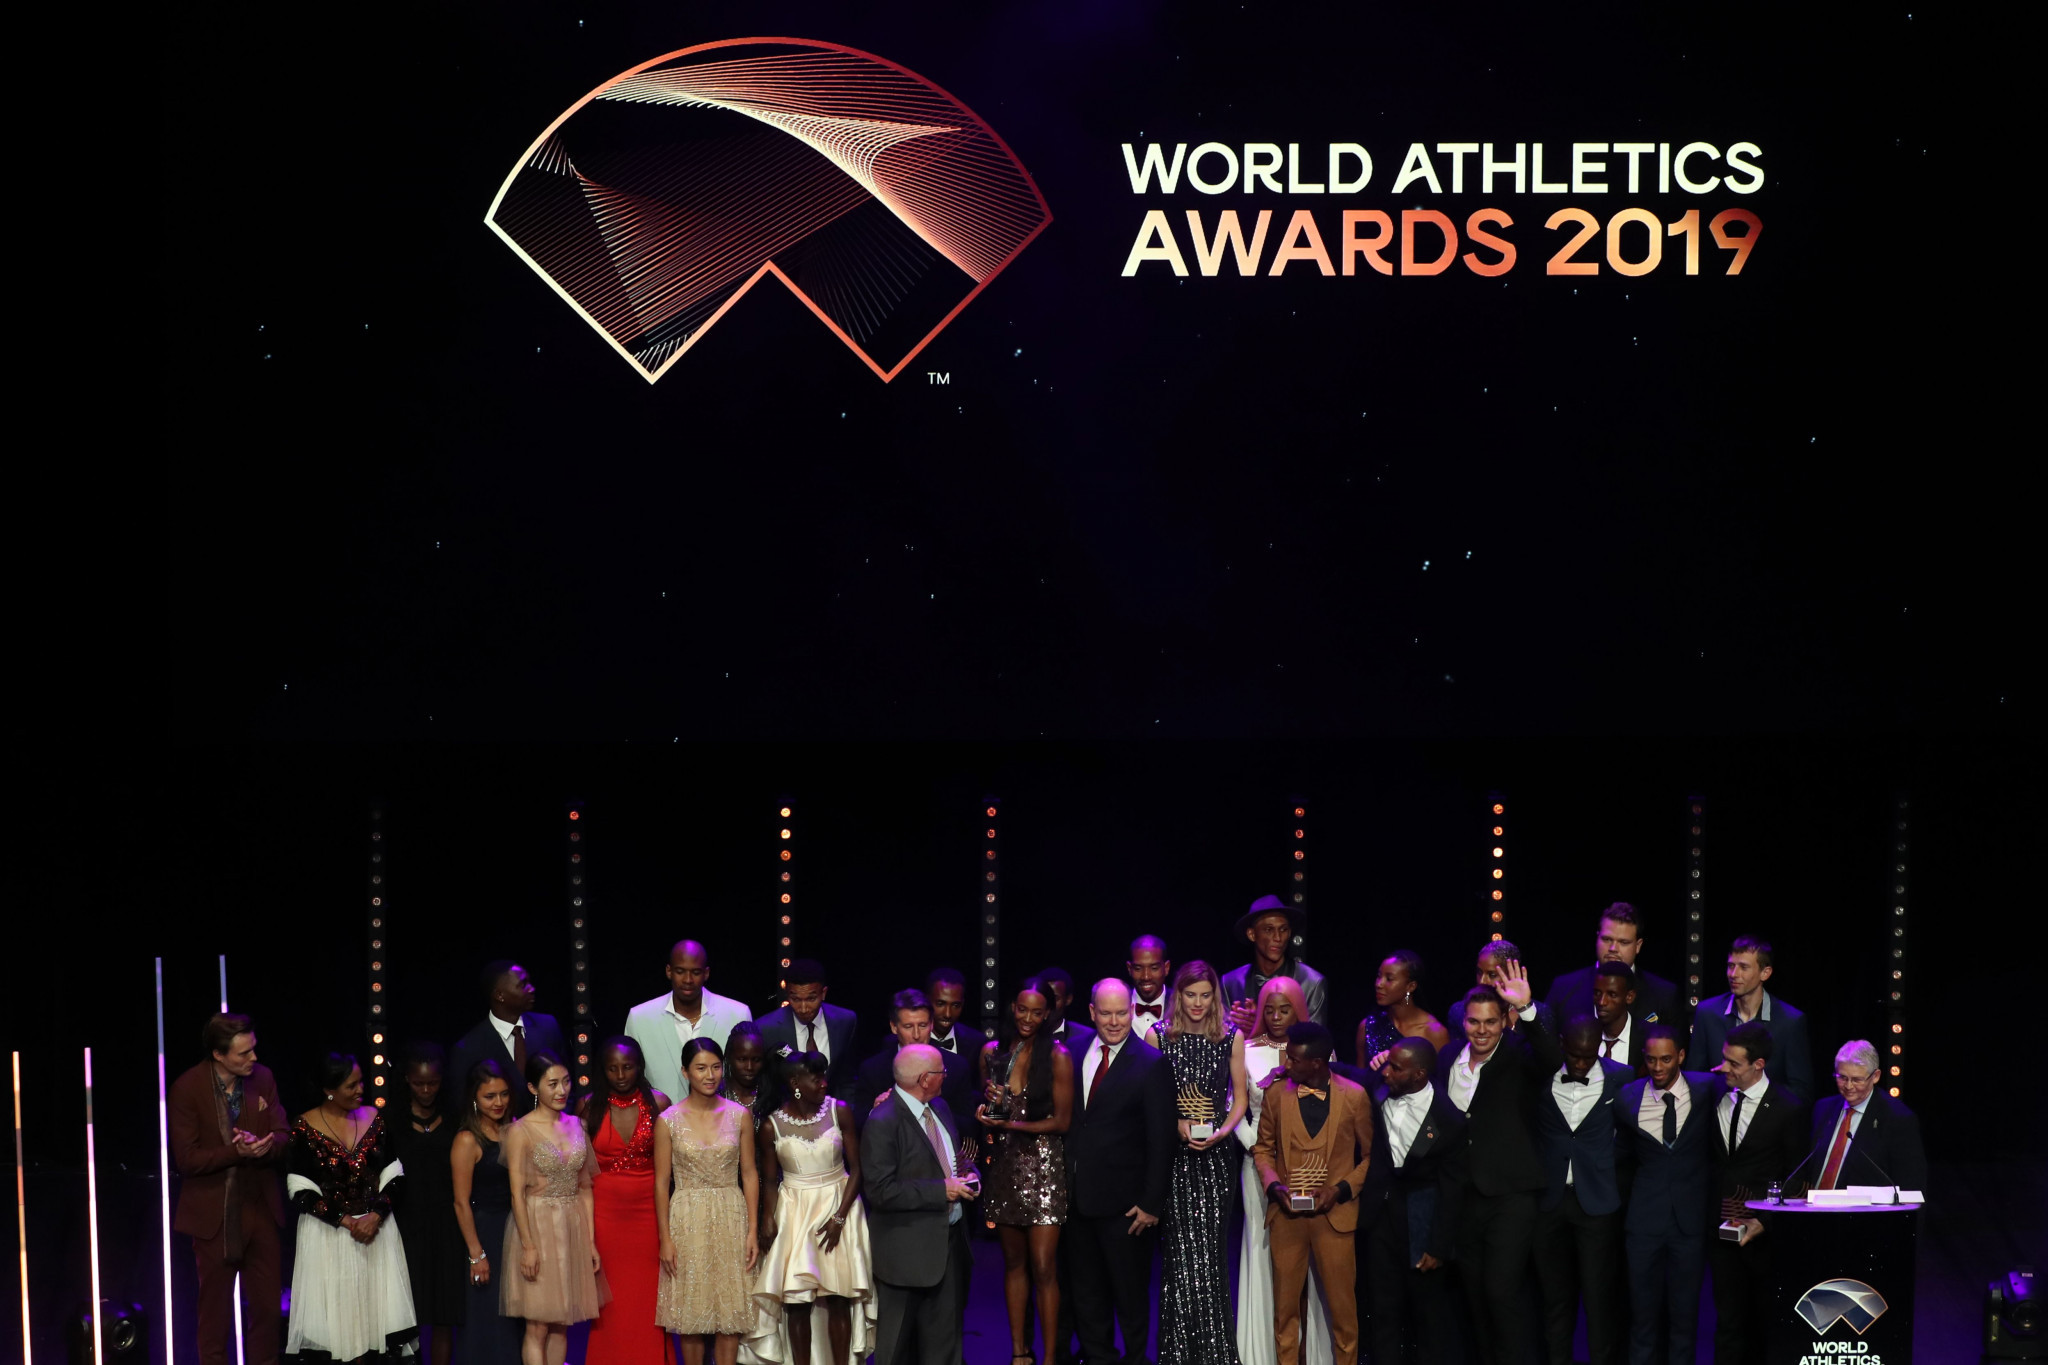 World Athletics Awards to be virtual event in 2020